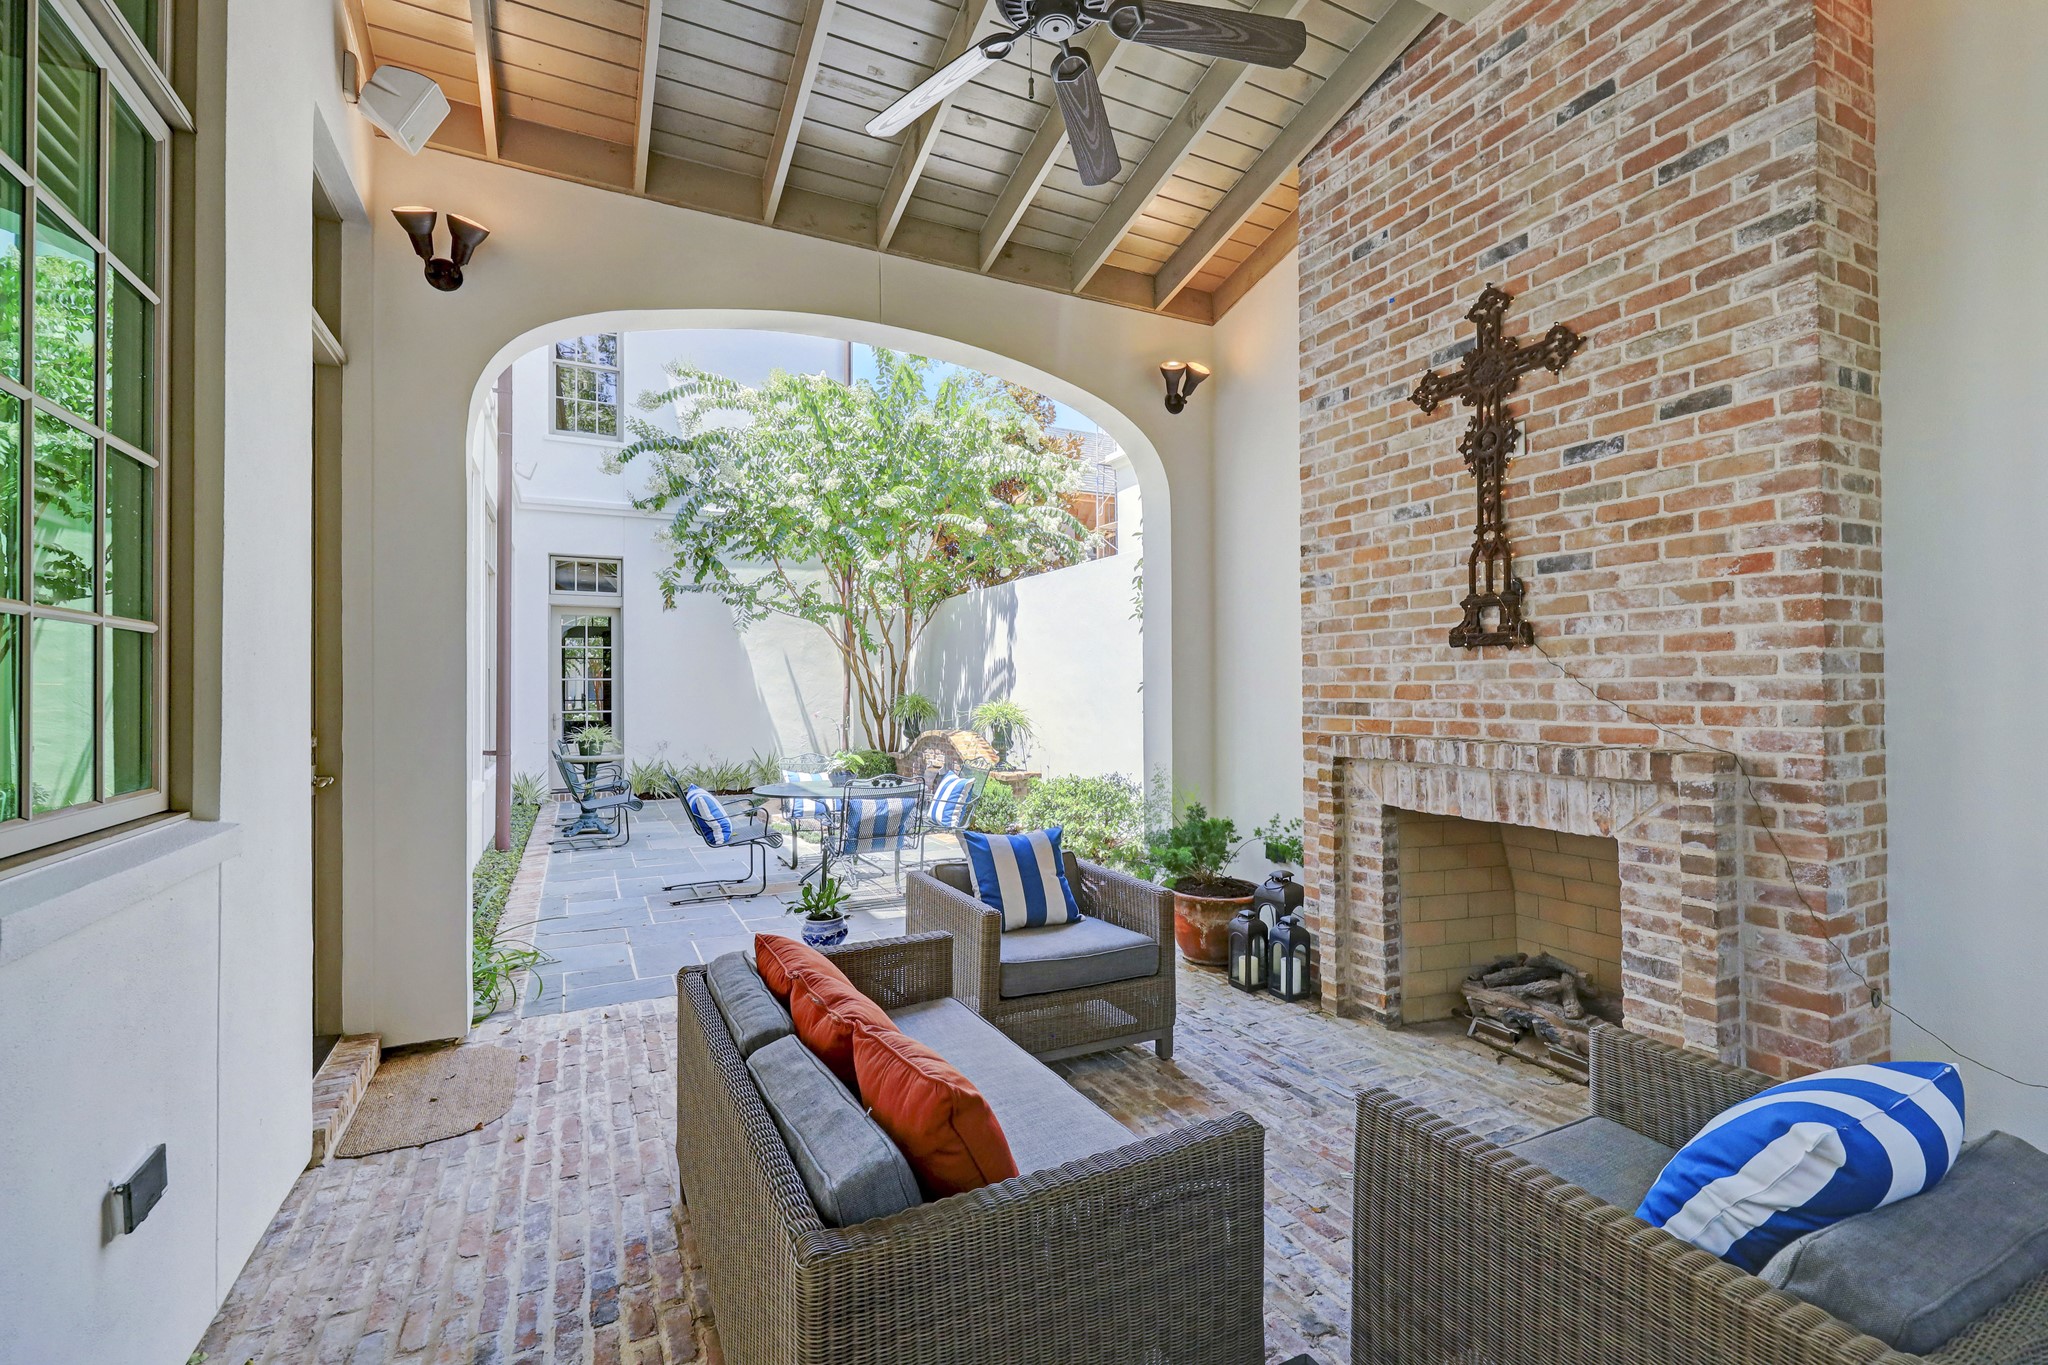 Wonderful covered patio and fireplace with access just off kitchen and family room.